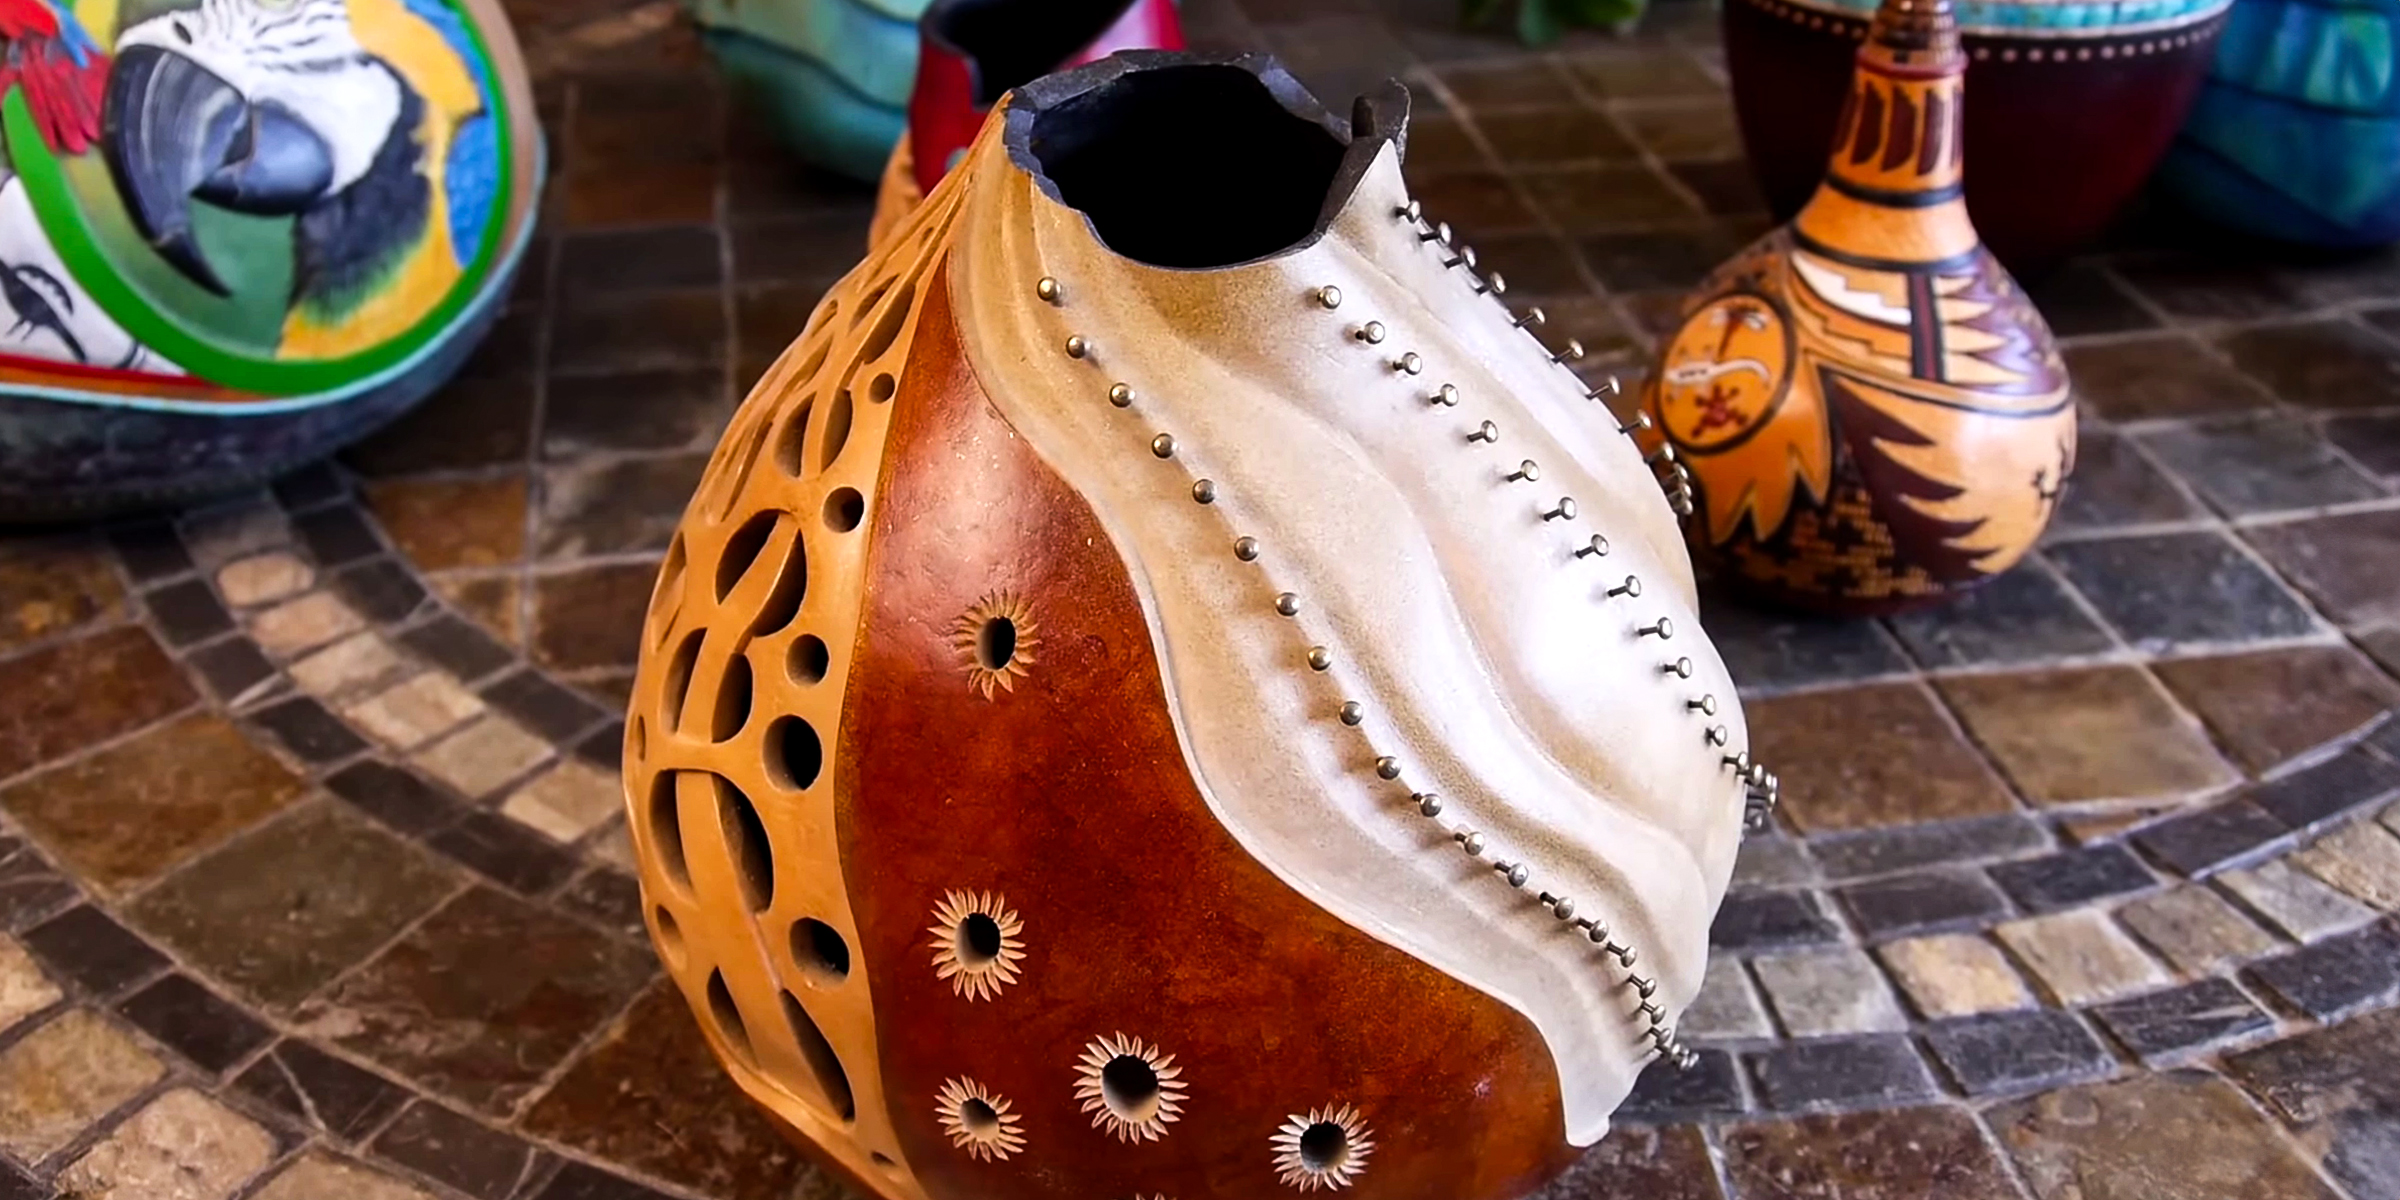 A gourd vase | Source: YouTube/azgfd